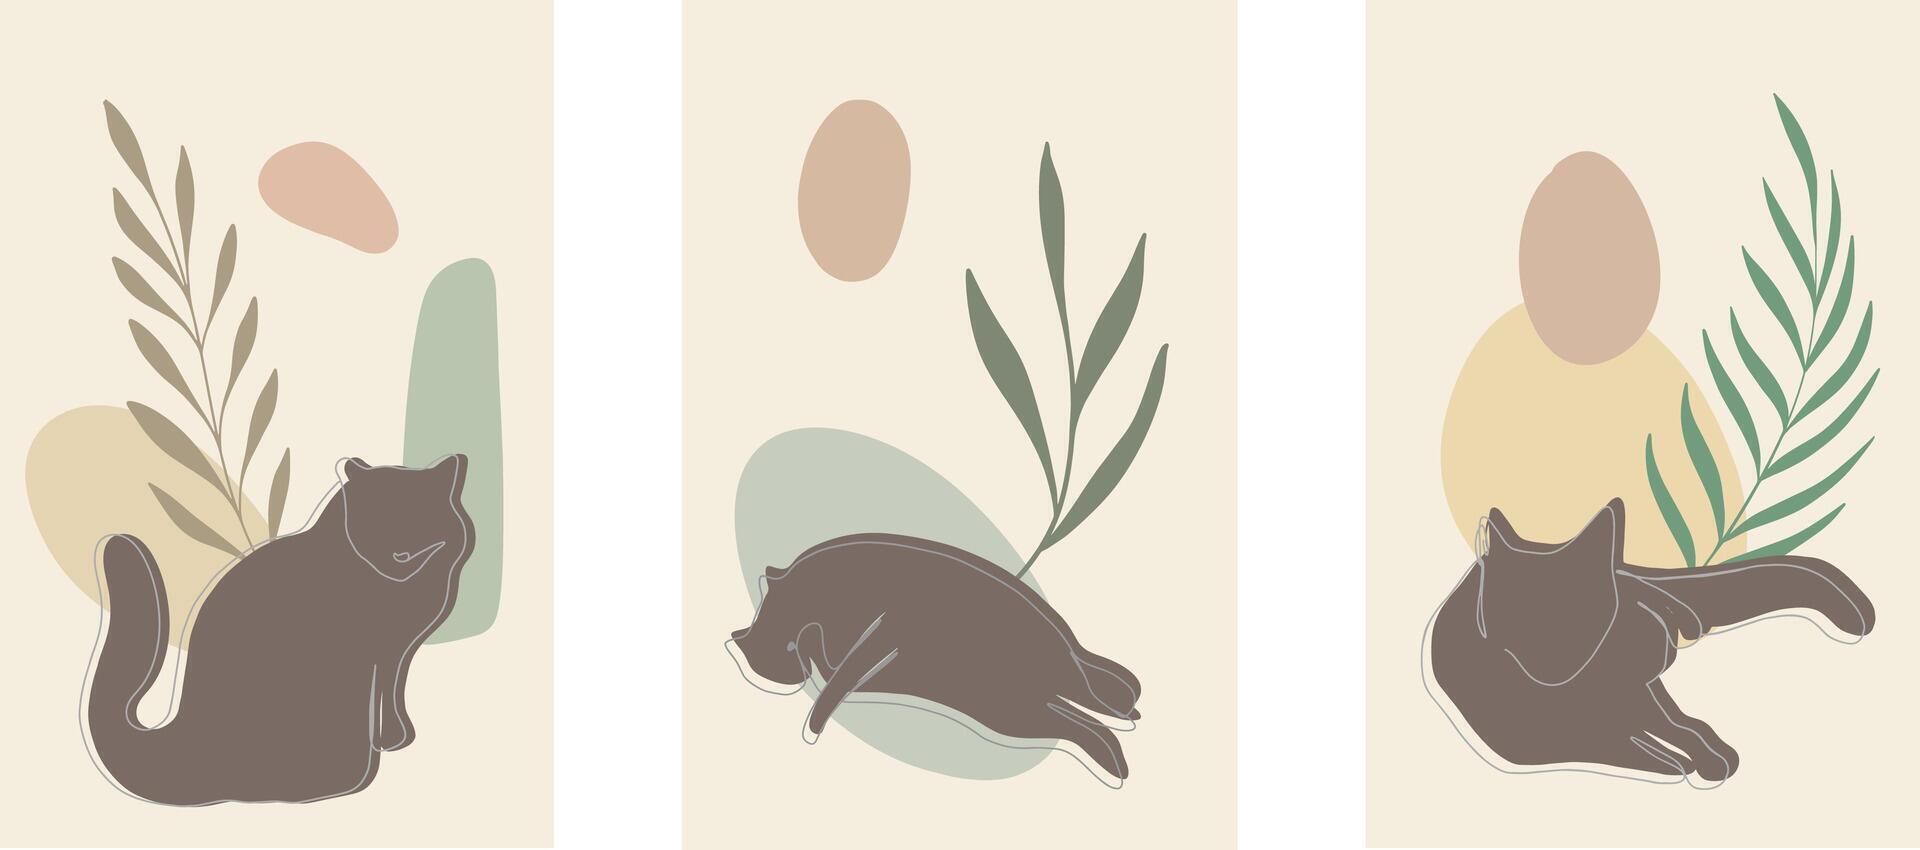 One line lying cat vector illustration with abstract shapes and plant branch, leaves beige colors